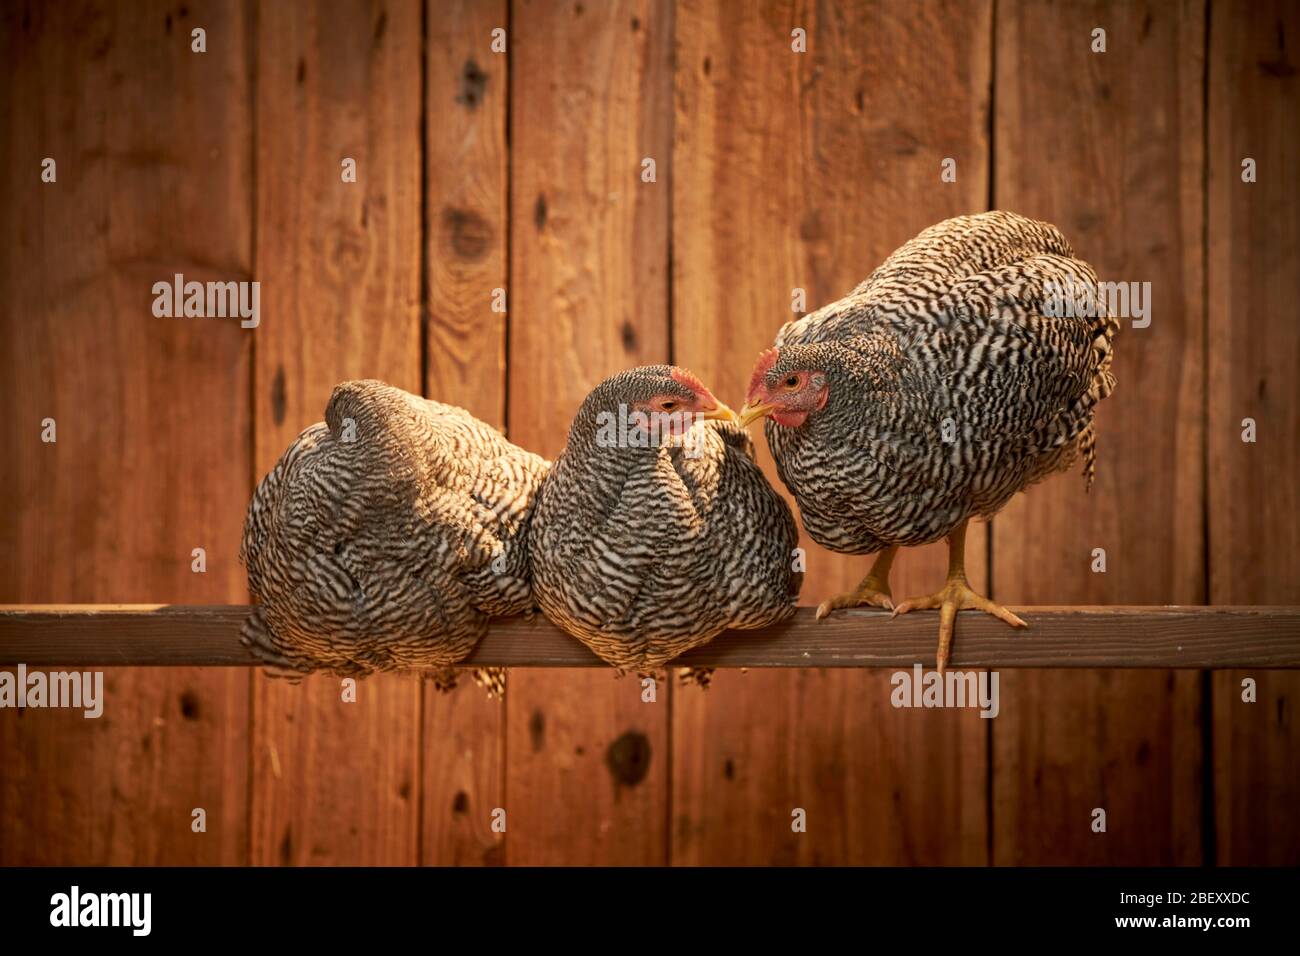 Domestic chicken, Amrock Bantam. Three hens on a perch in a coop, one of them sleeping. Germany. Stock Photo